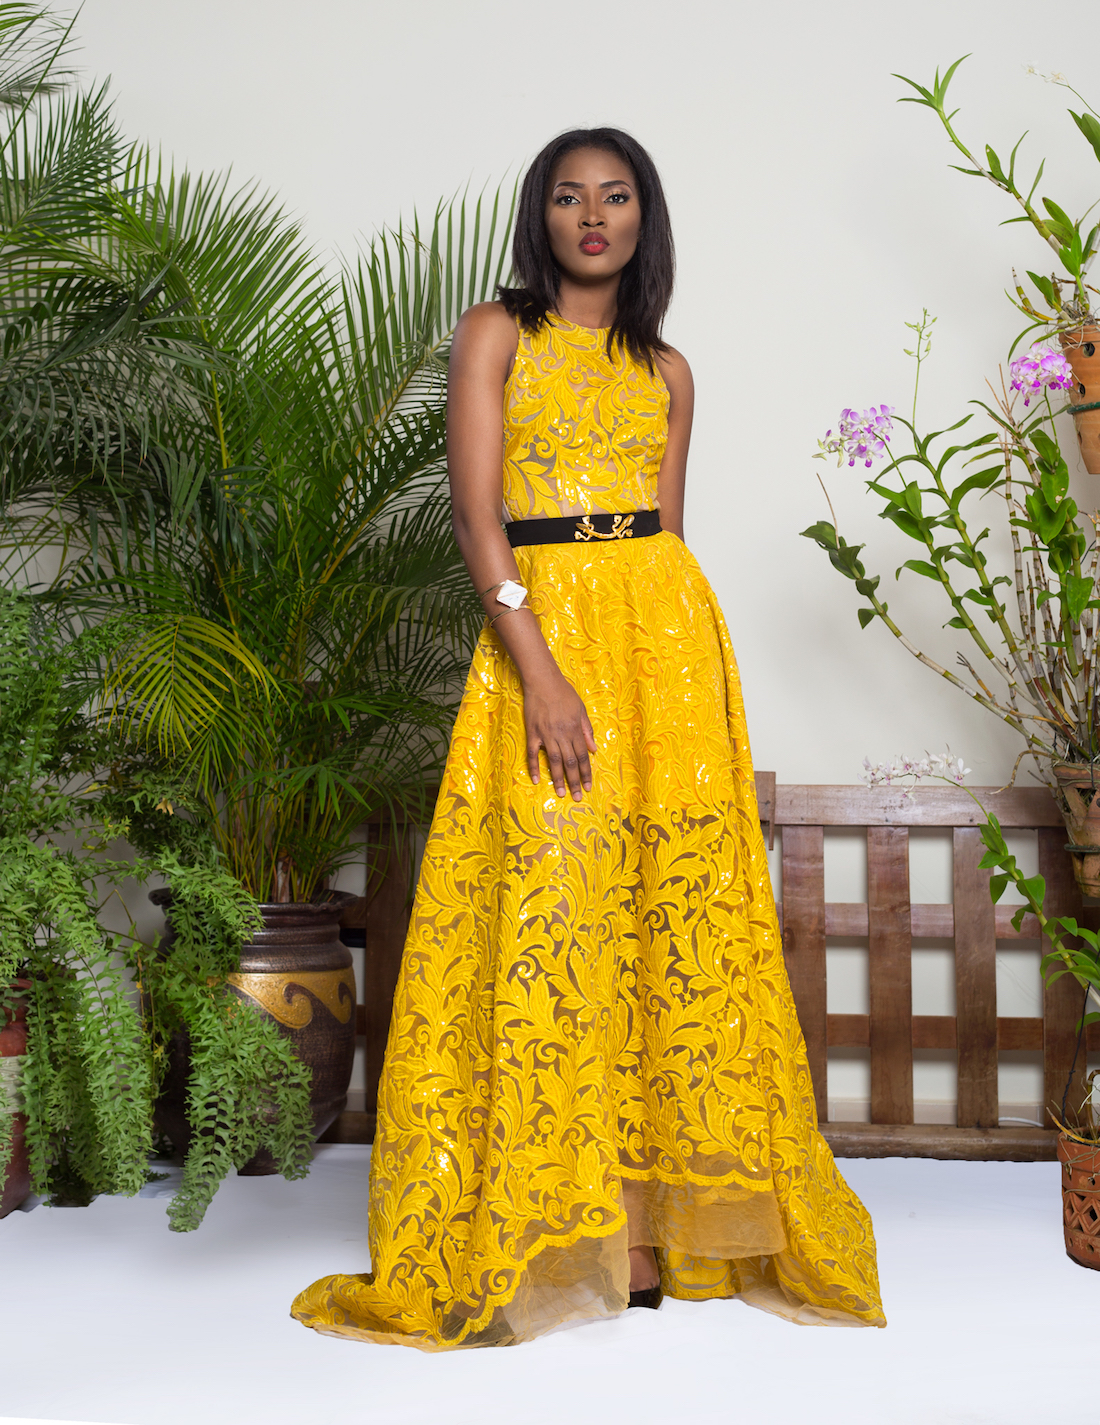 Totally Ethnik drops 'daring' and sensual S/S 2016 collection | TRUE Africa